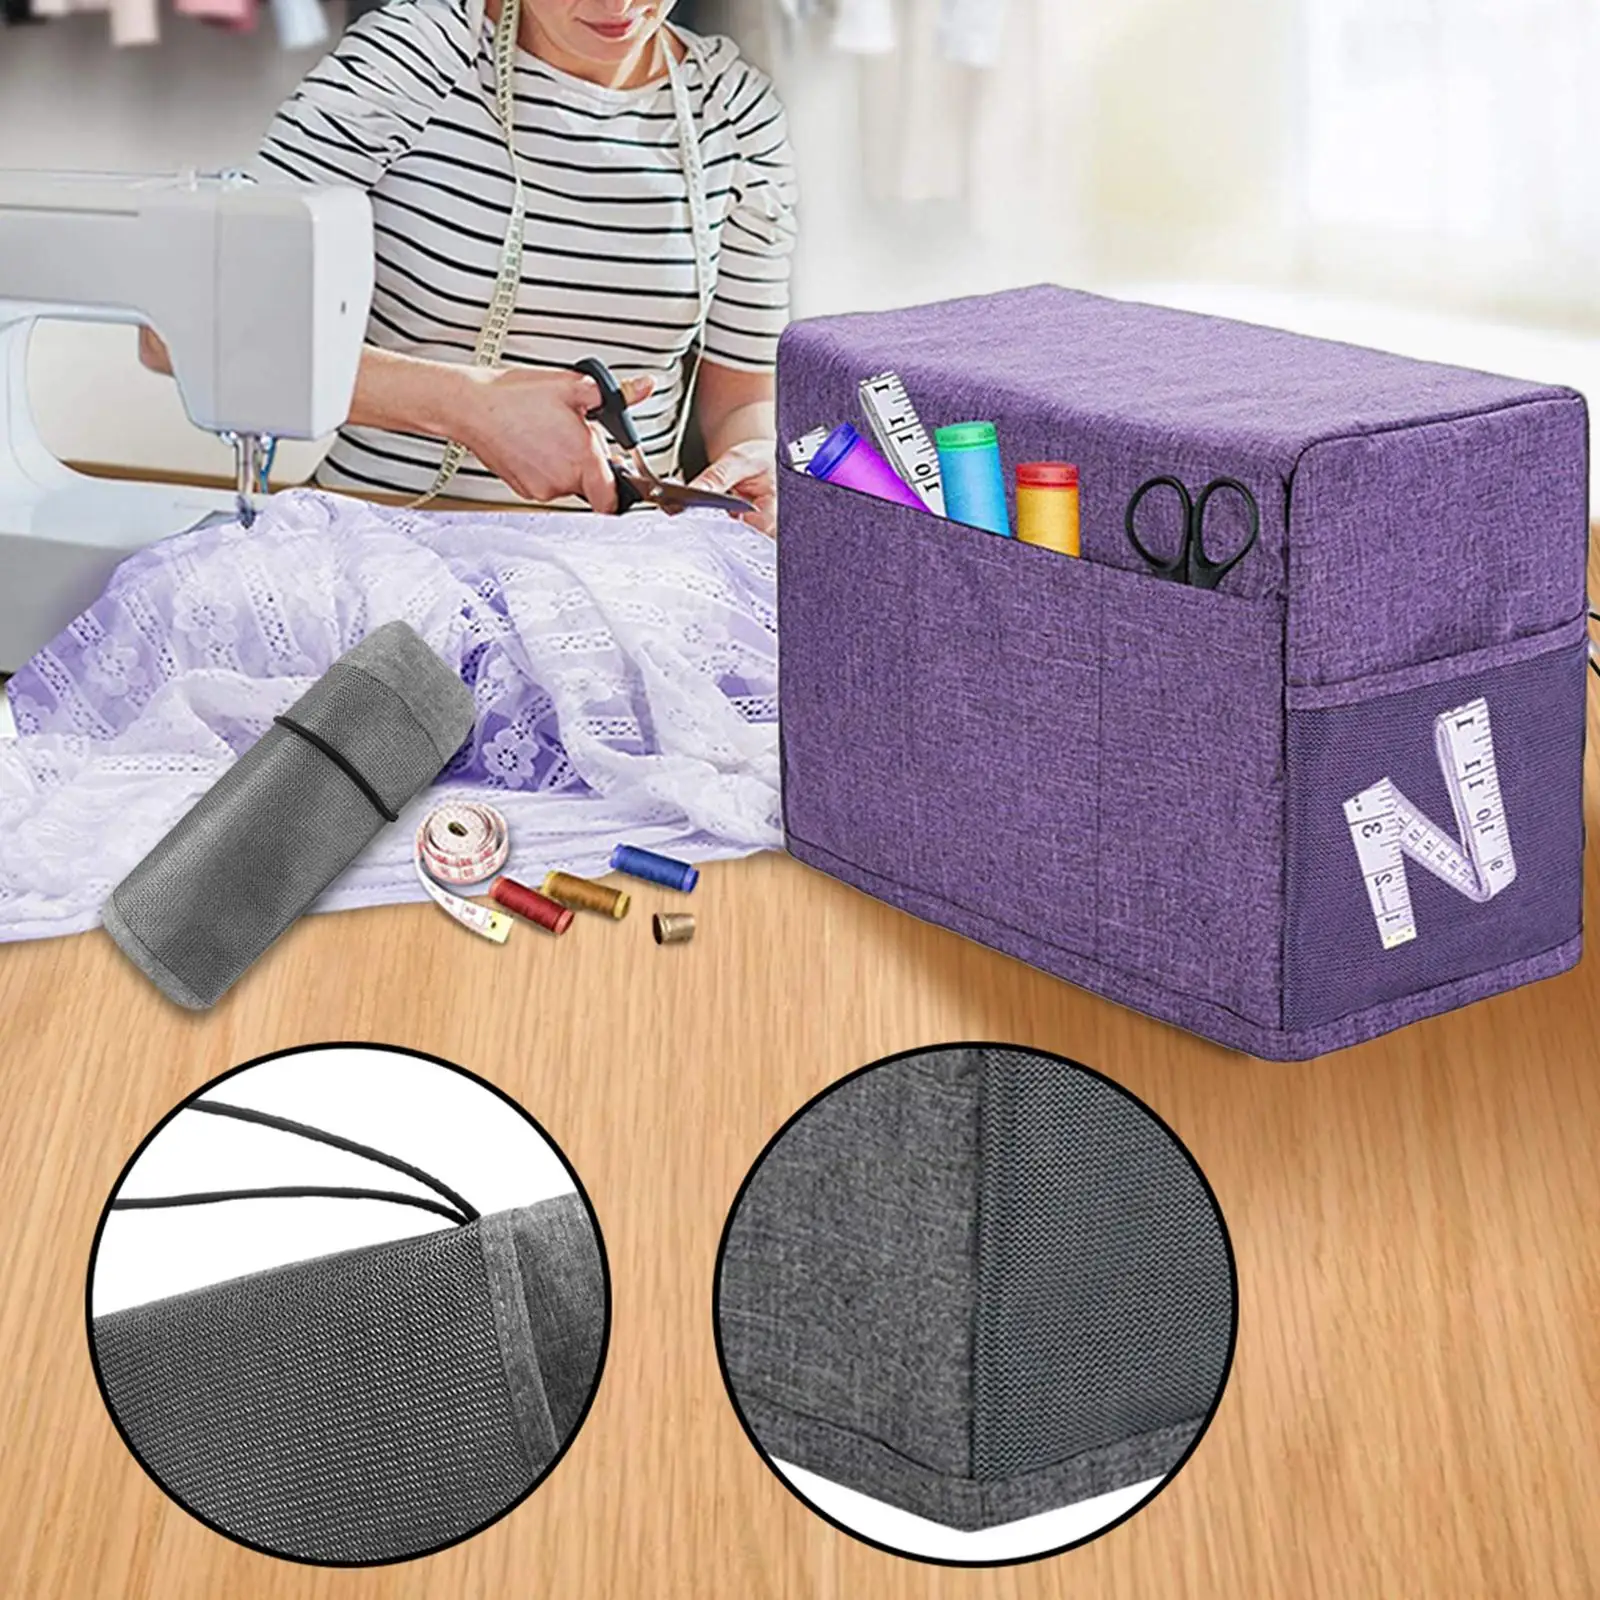 Dust Covers Sewing Machine Cover for Knitting Scissors Presser Feet Domestic Sewing Machine Most Standard Sewing Machines